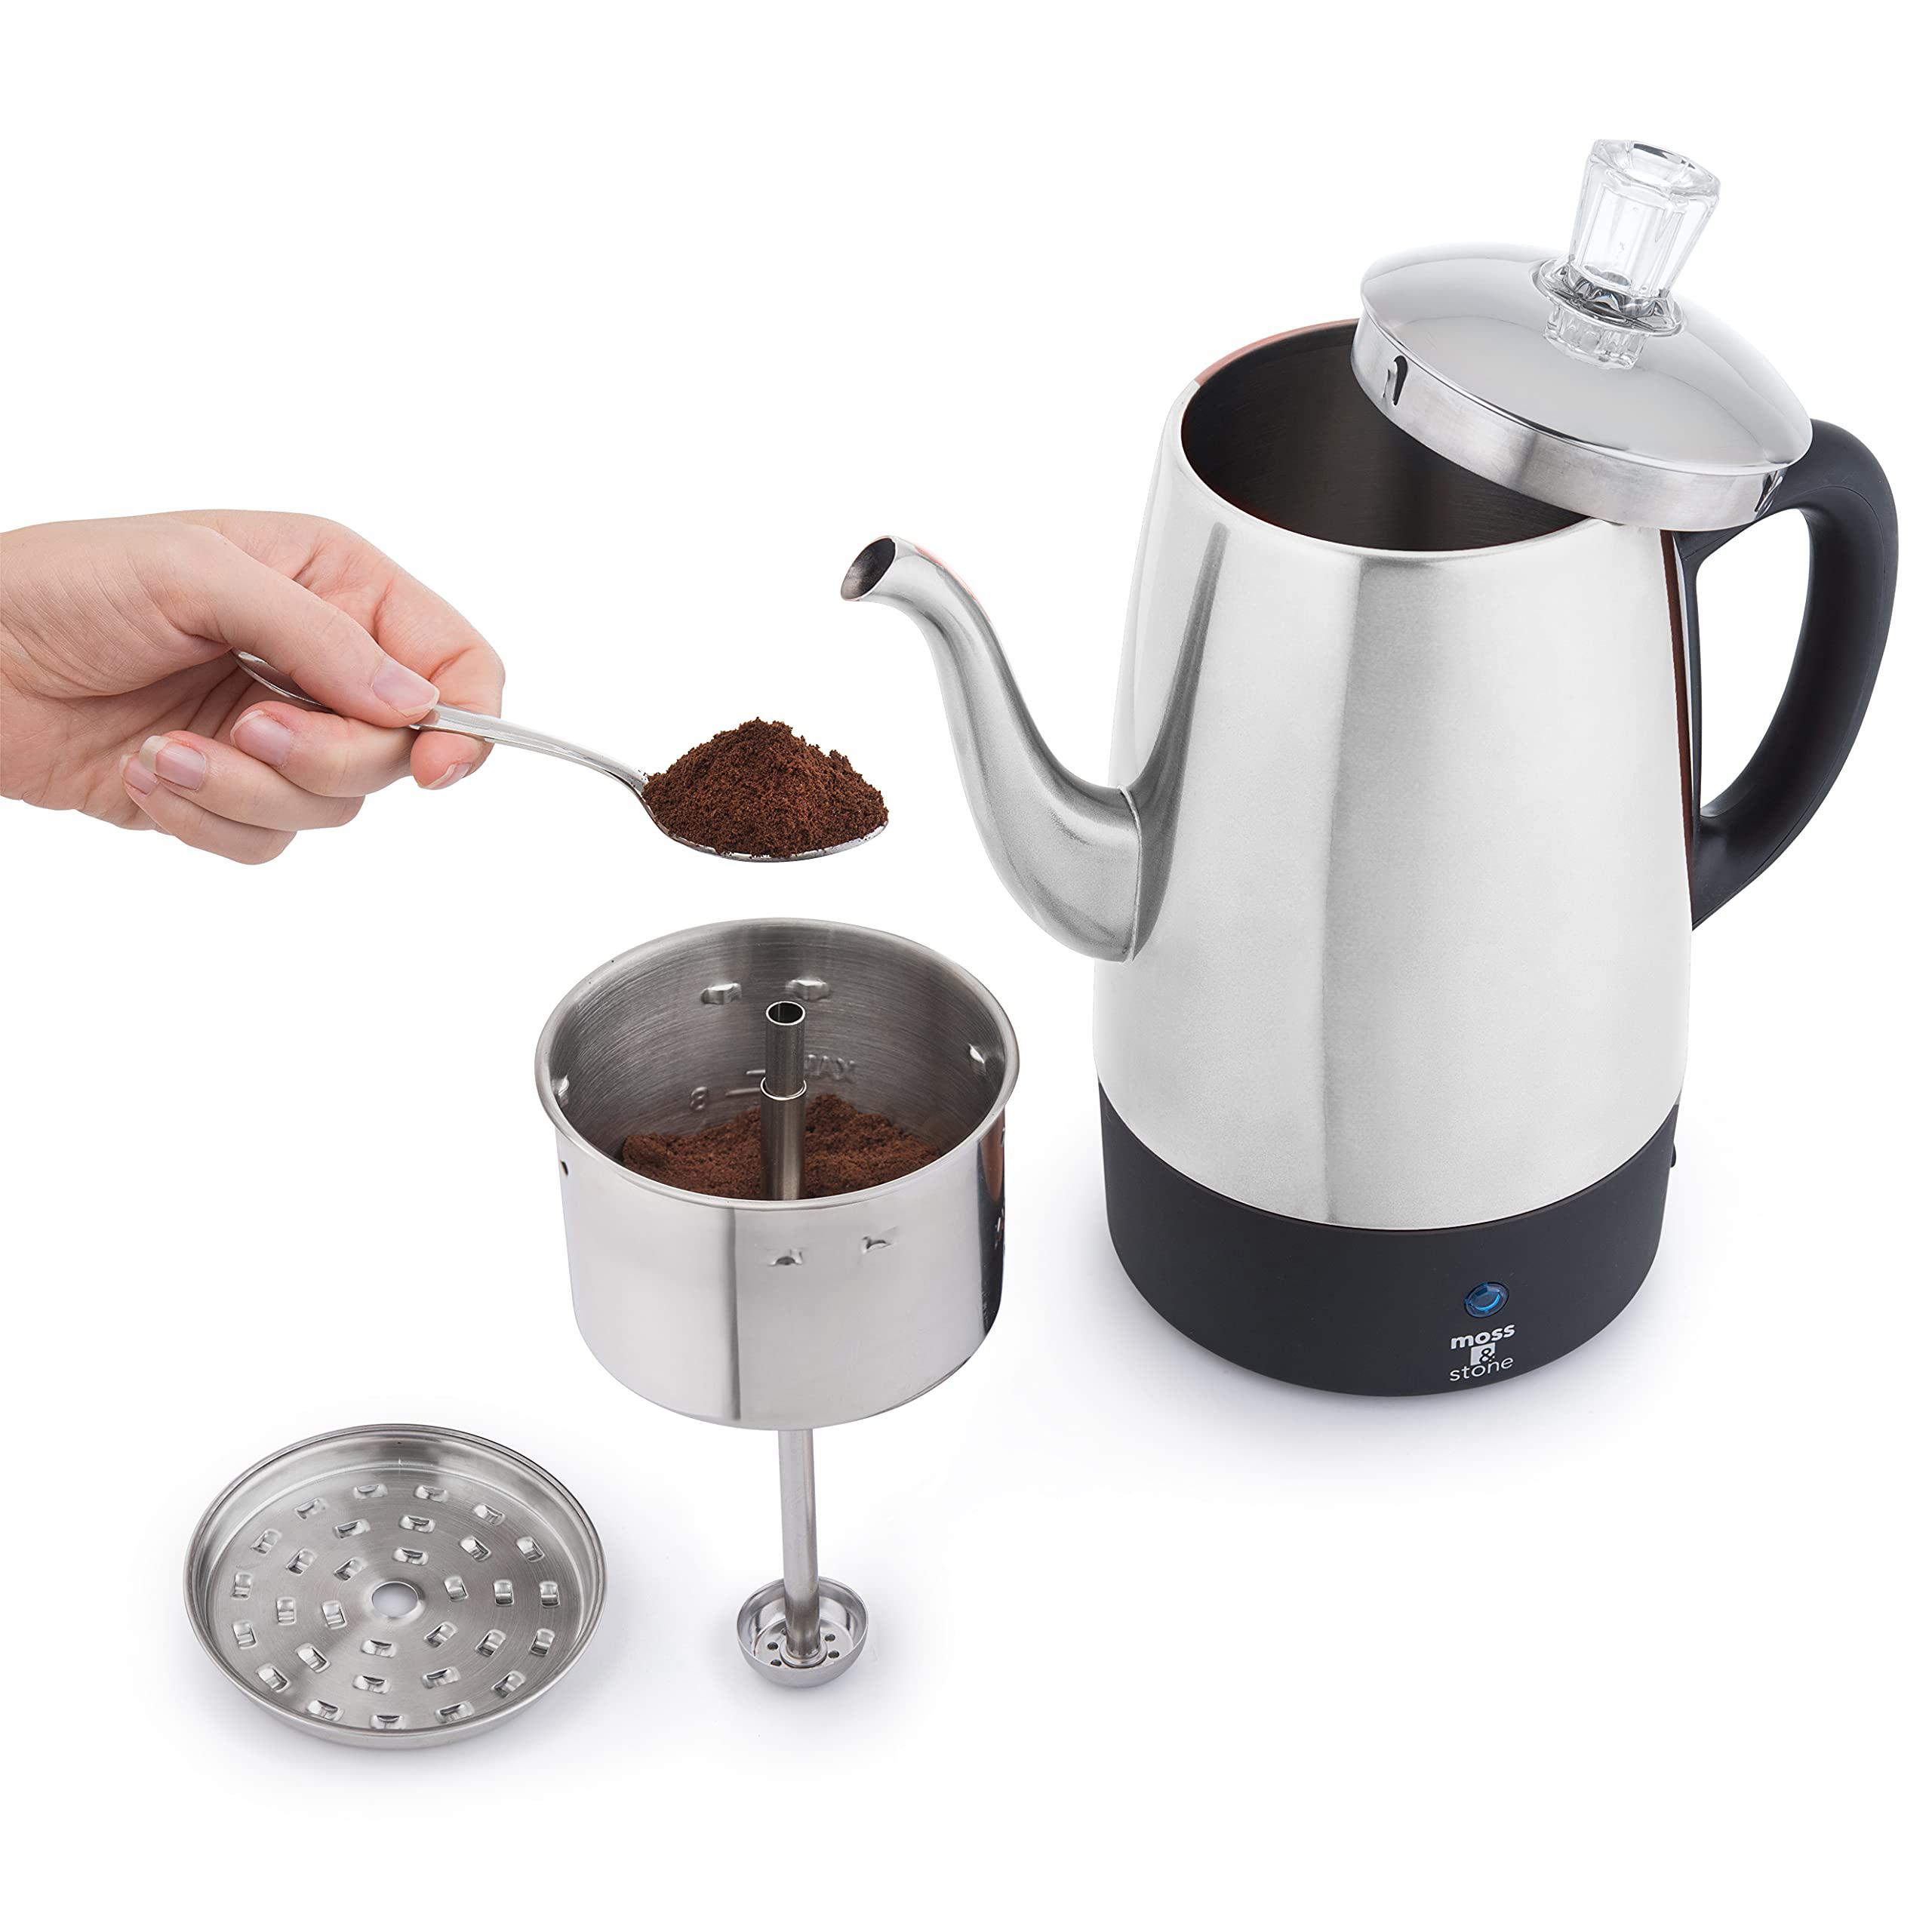 moss & stone electric coffee percolator | camping coffee pot silver body with stainless steel lids coffee maker | percolator 